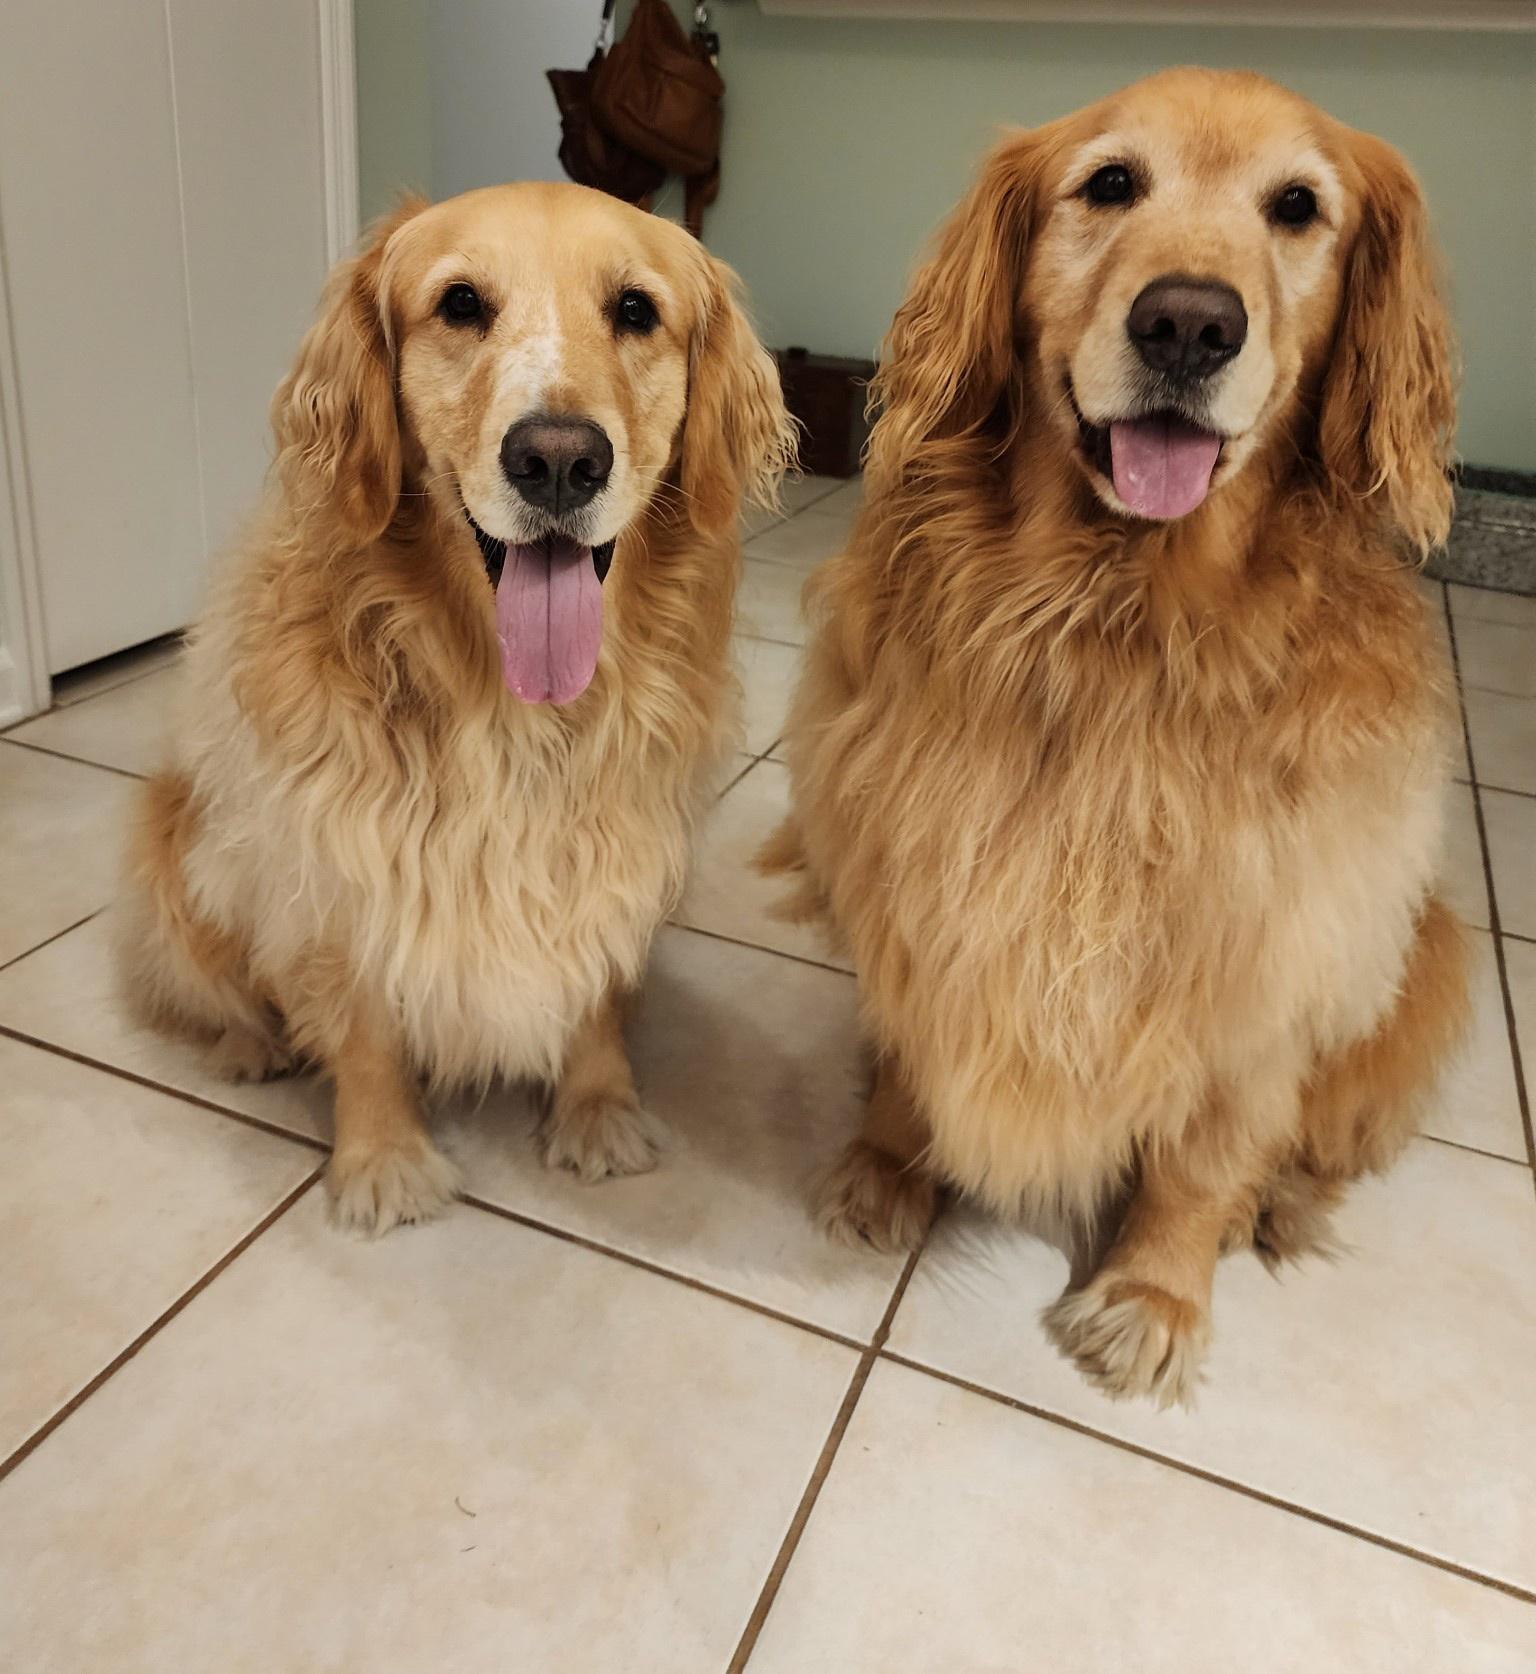 Hello from Gus and Murphy.